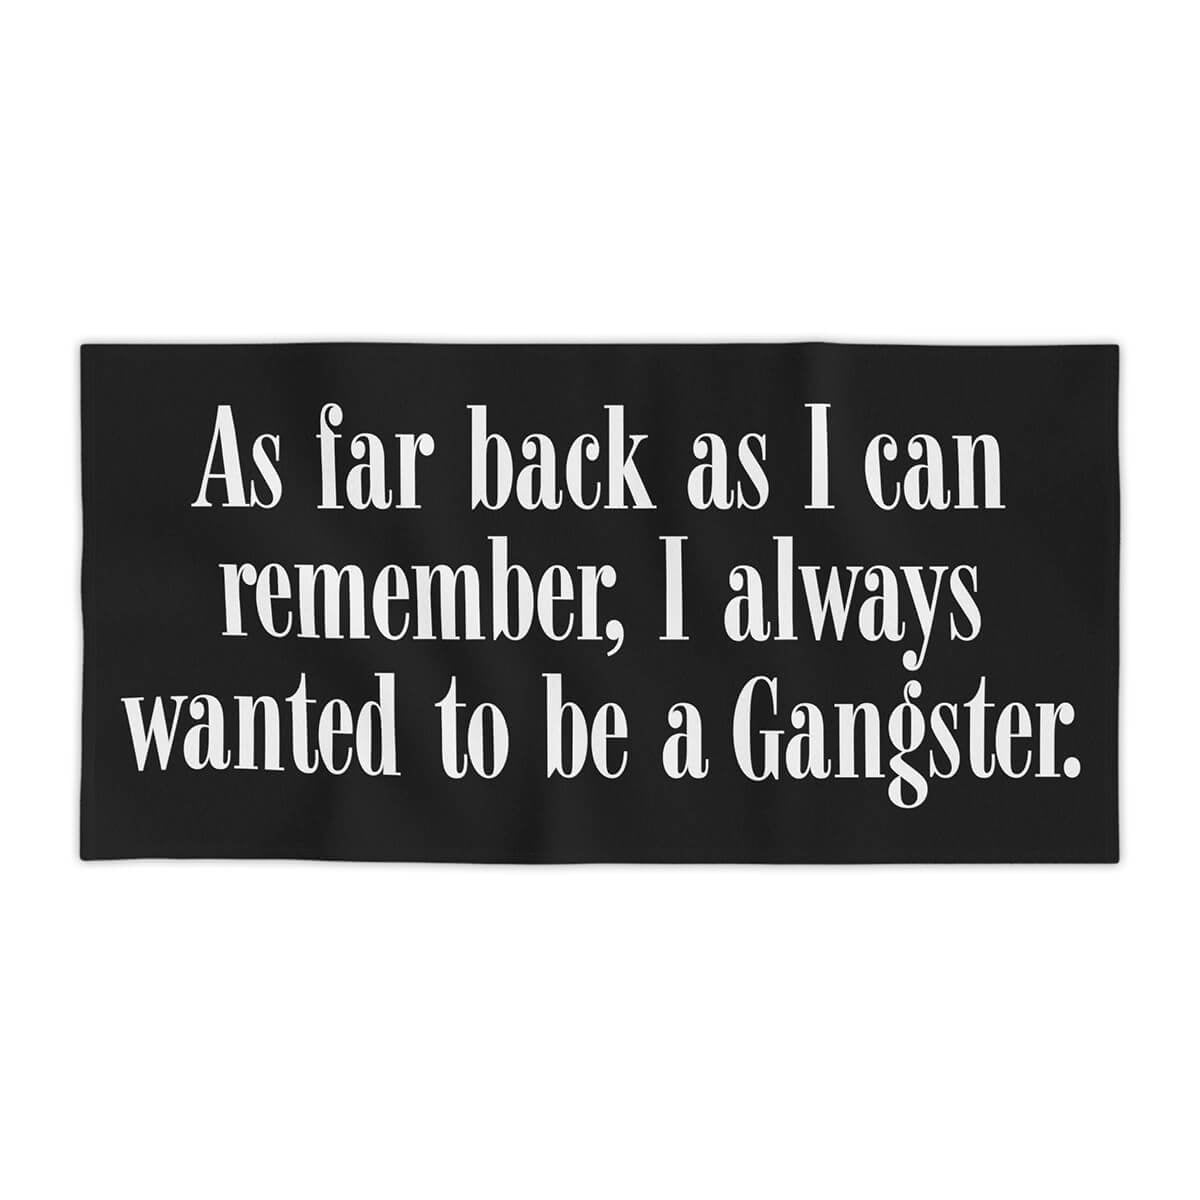 I always wanted to be a Gangster Quote Mobster Beach Towel